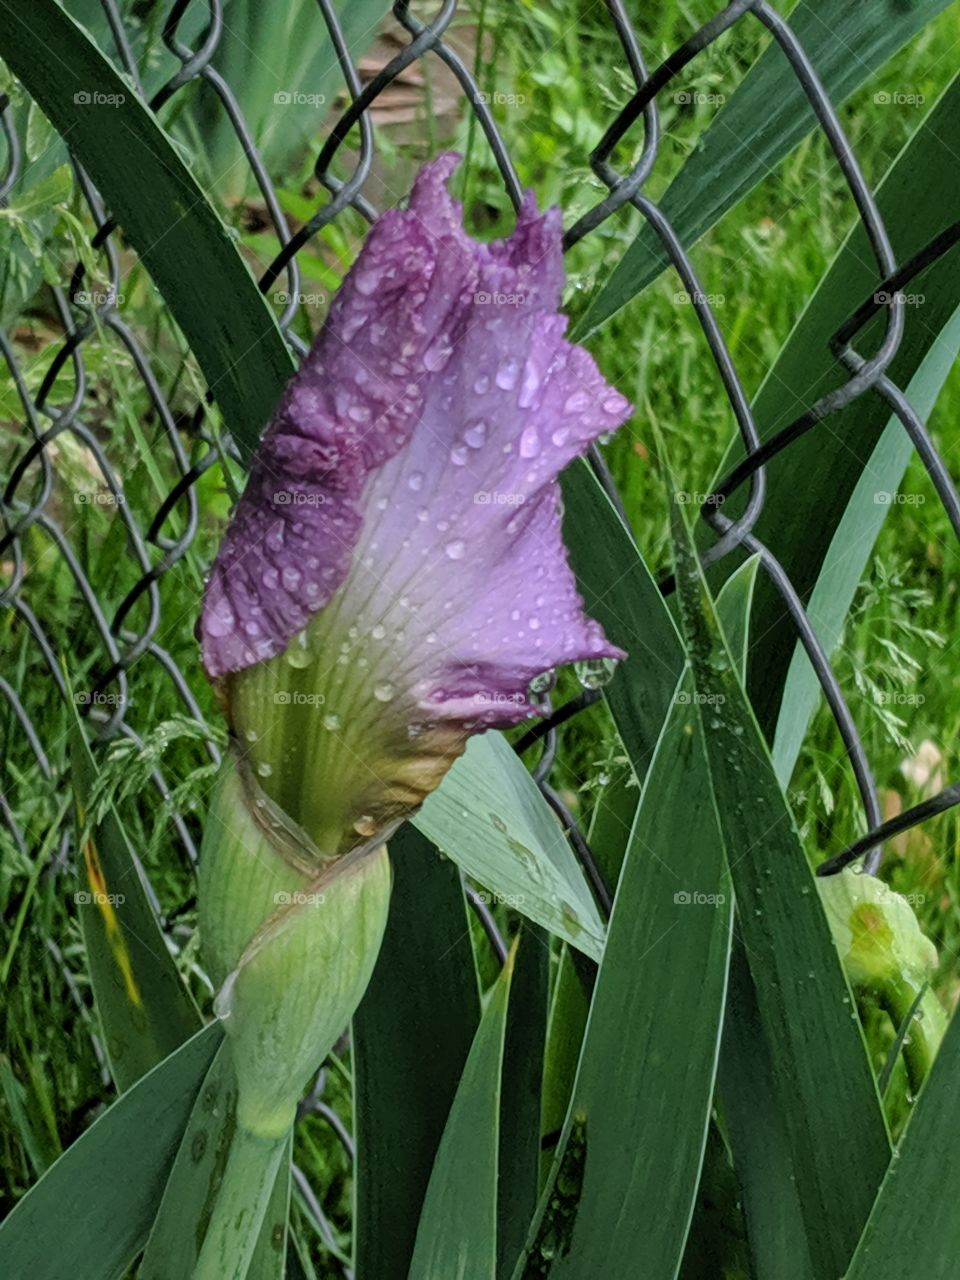 The Iris will come out when the rain is over.